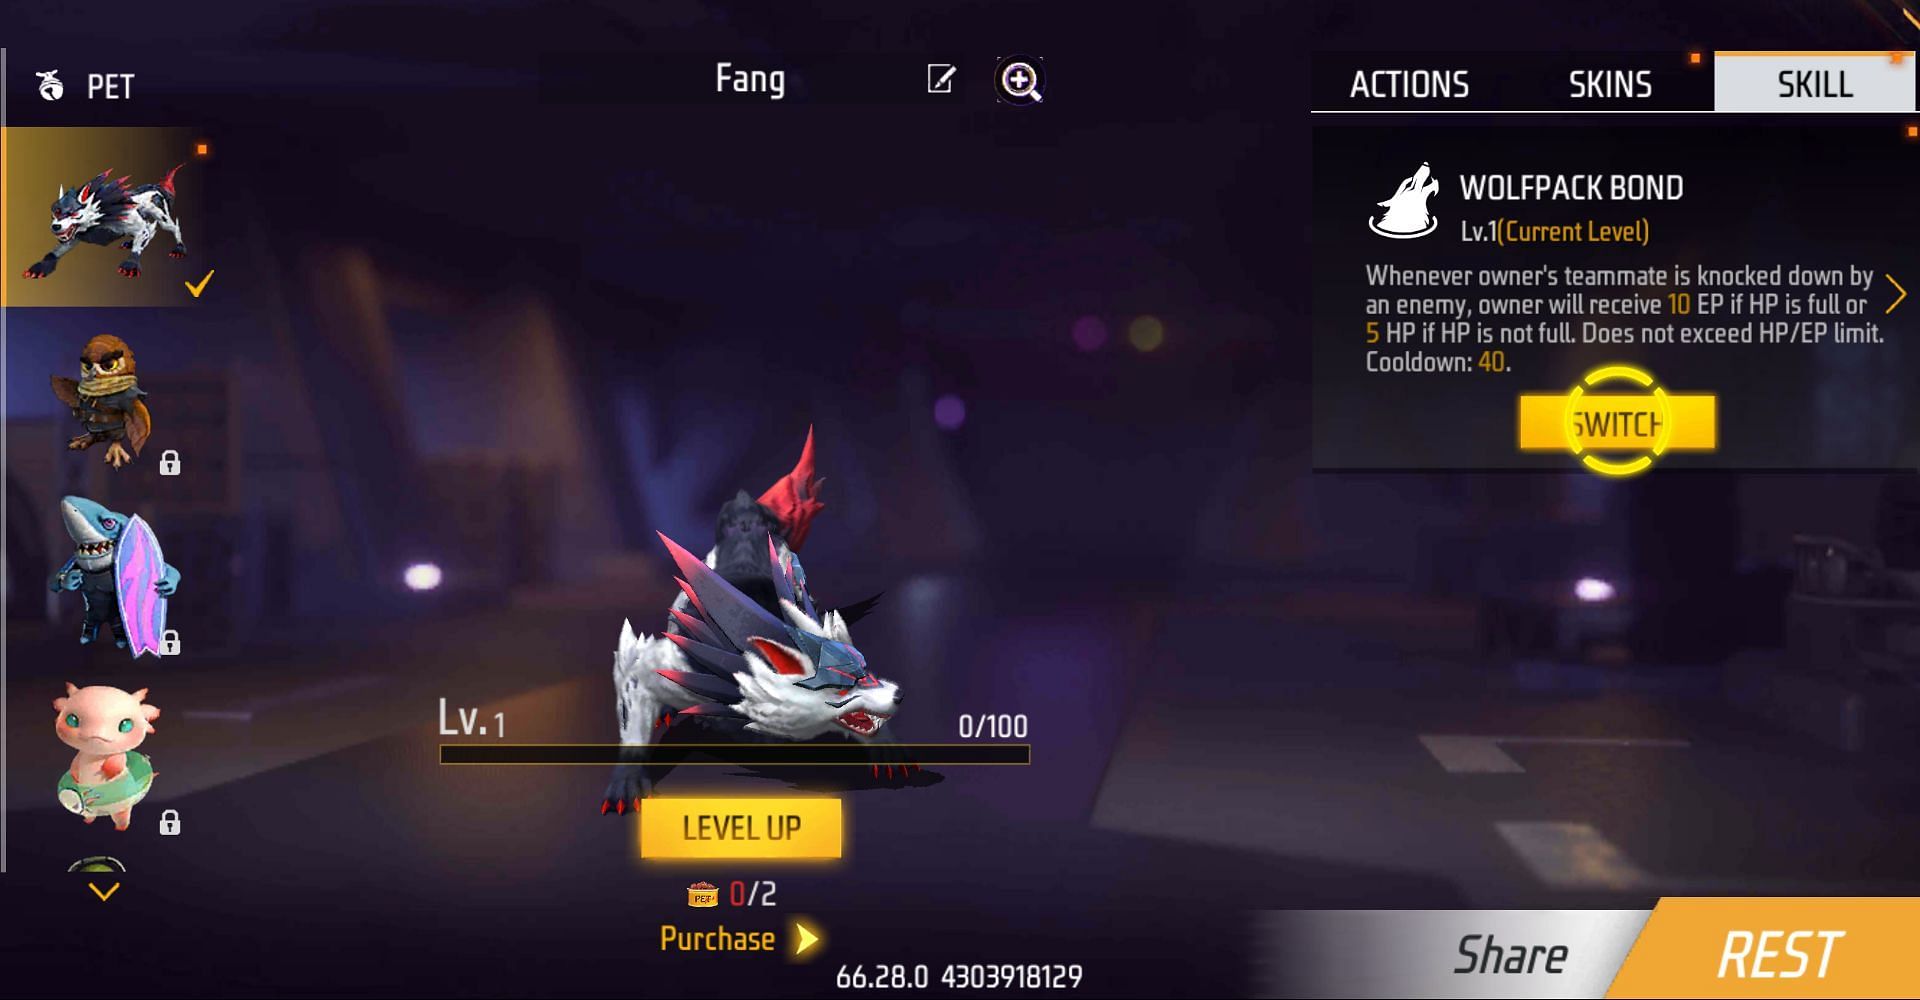 New Fang has Wolfpack Bond ability (Image via Garena)